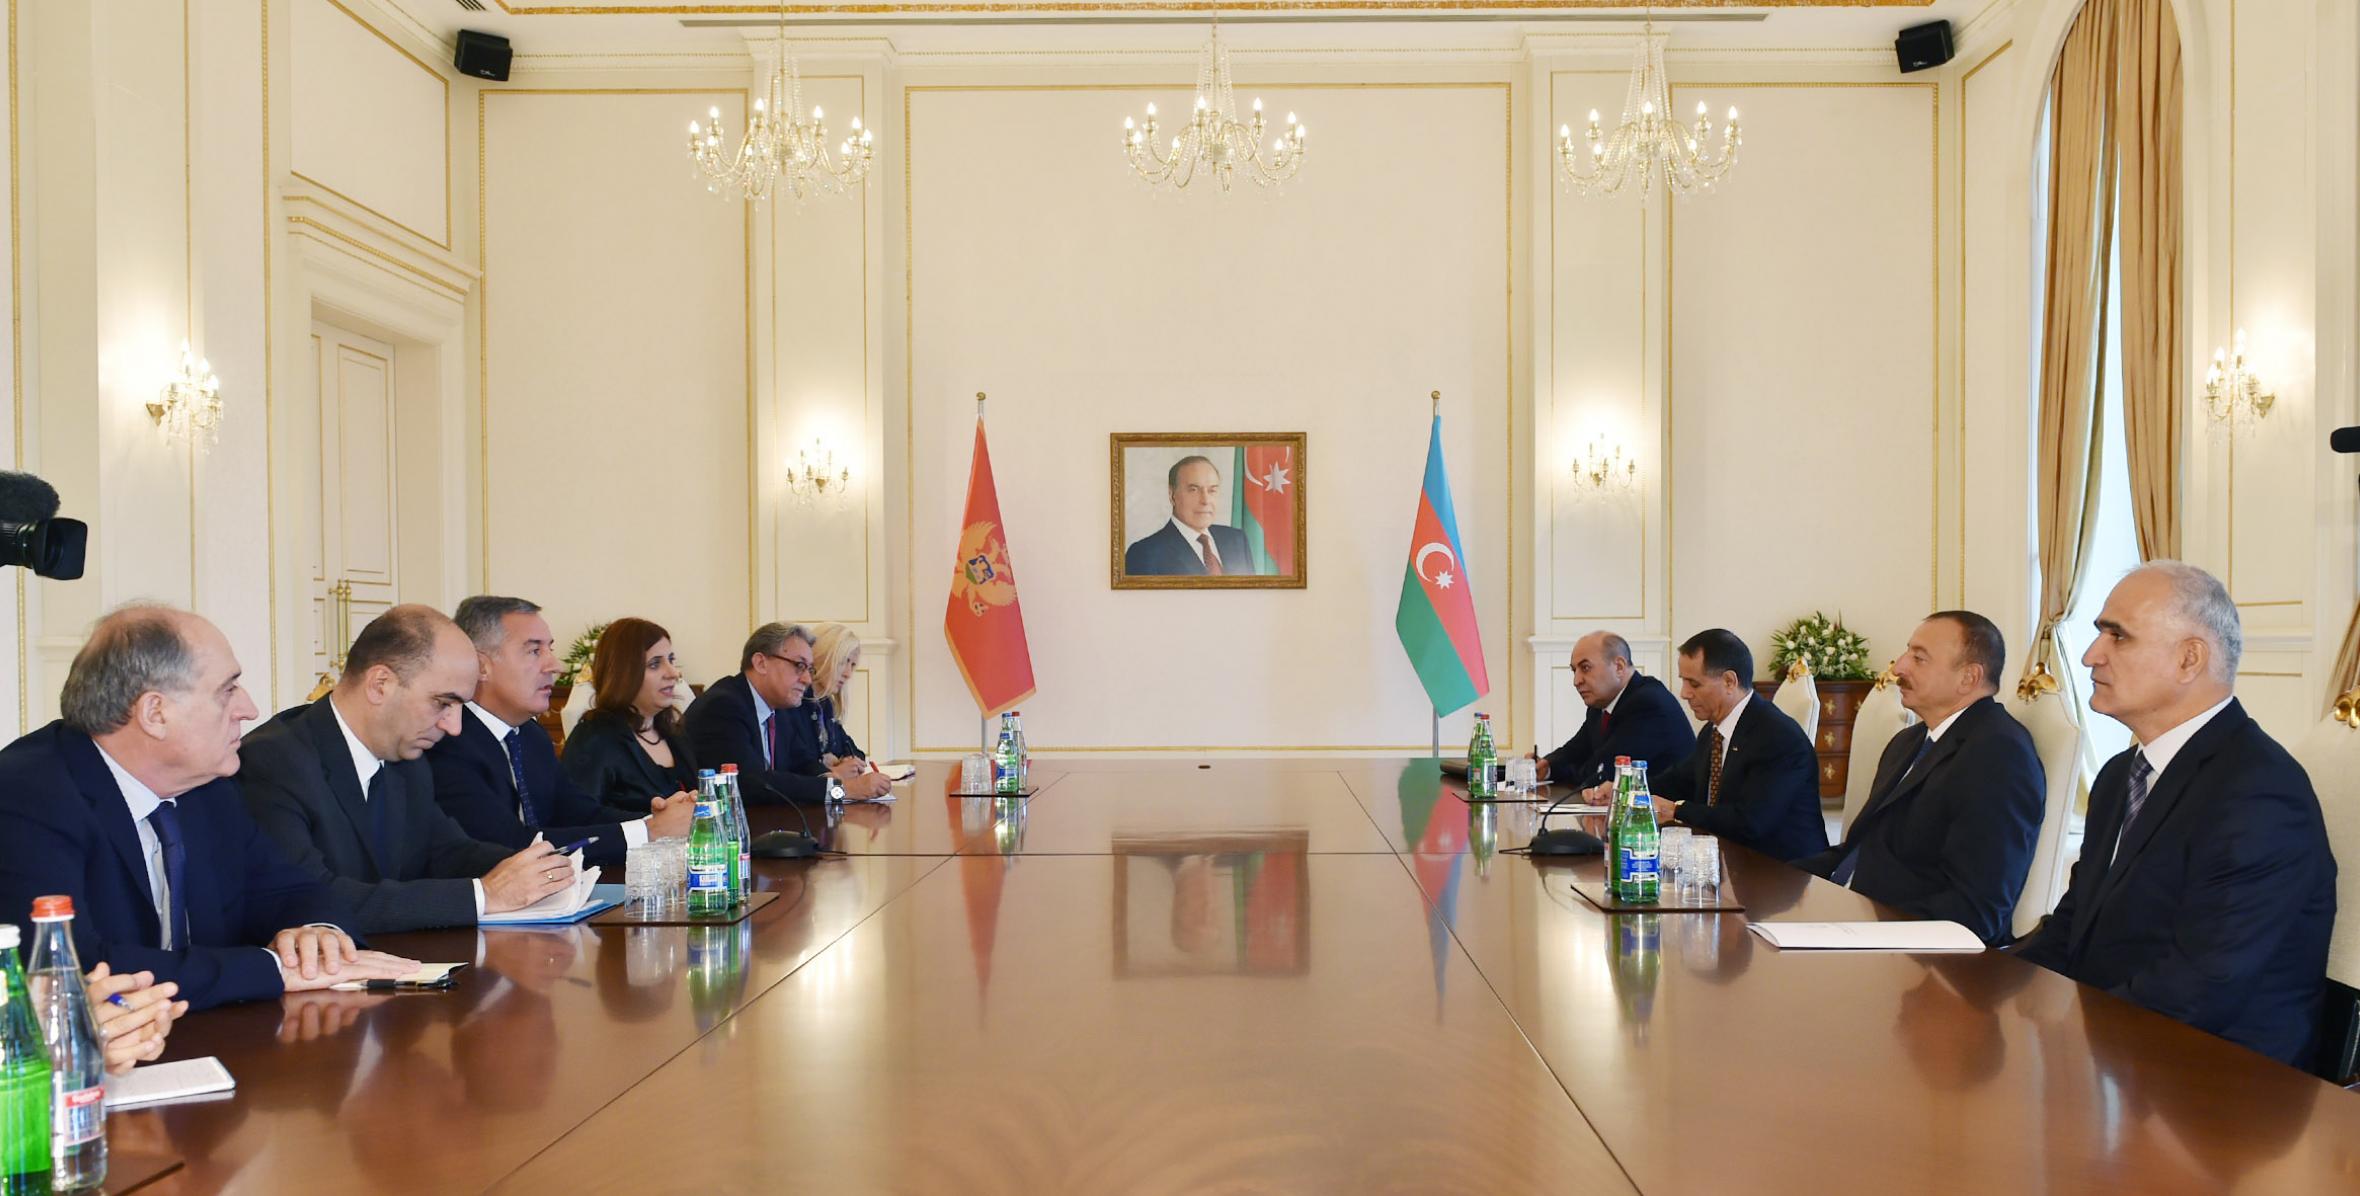 Ilham Aliyev received a delegation led by the Prime Minister of Montenegro